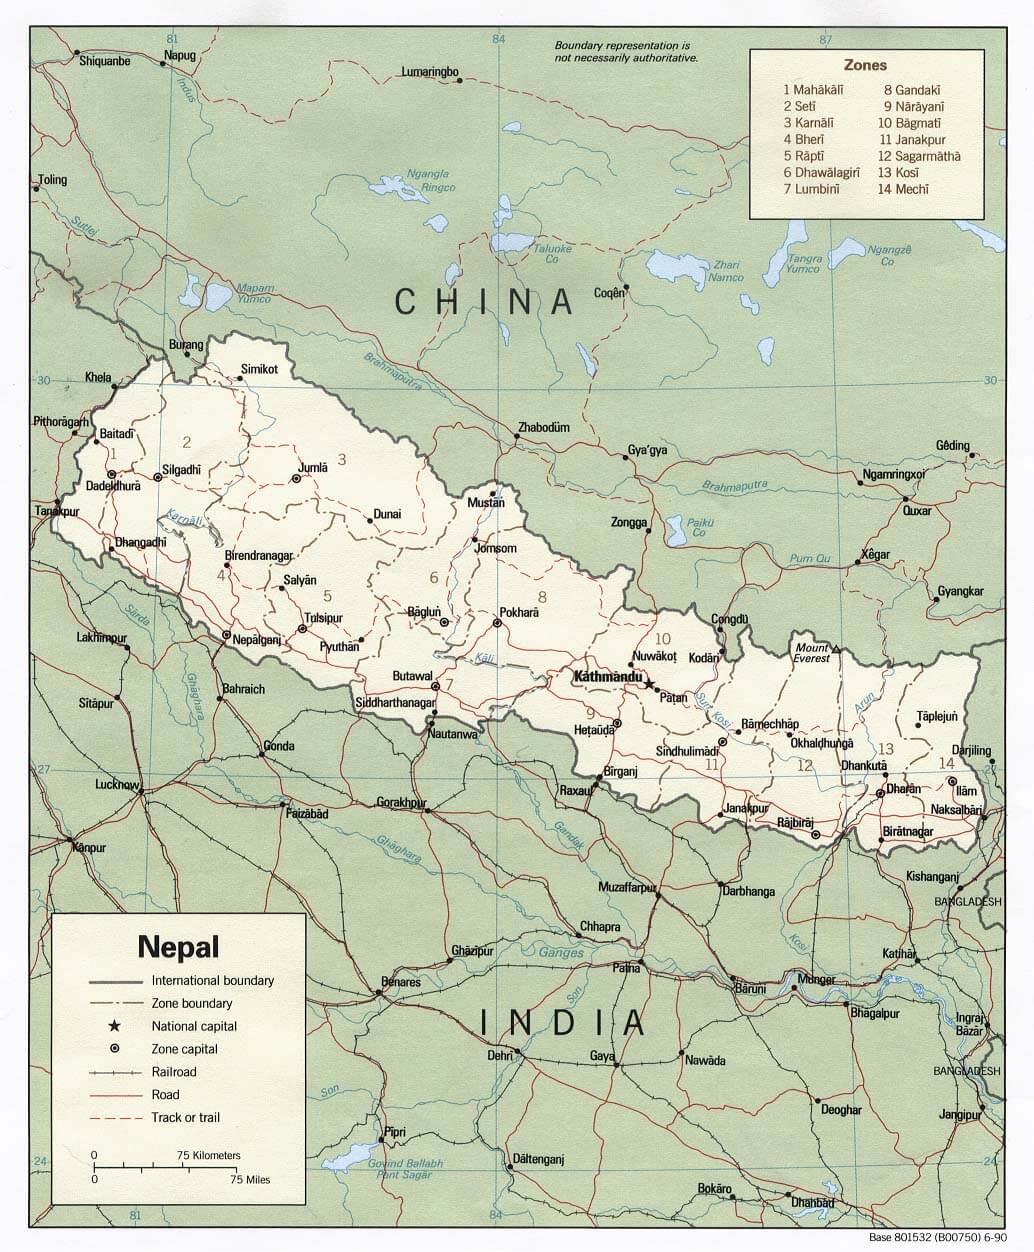 provinces map of nepal